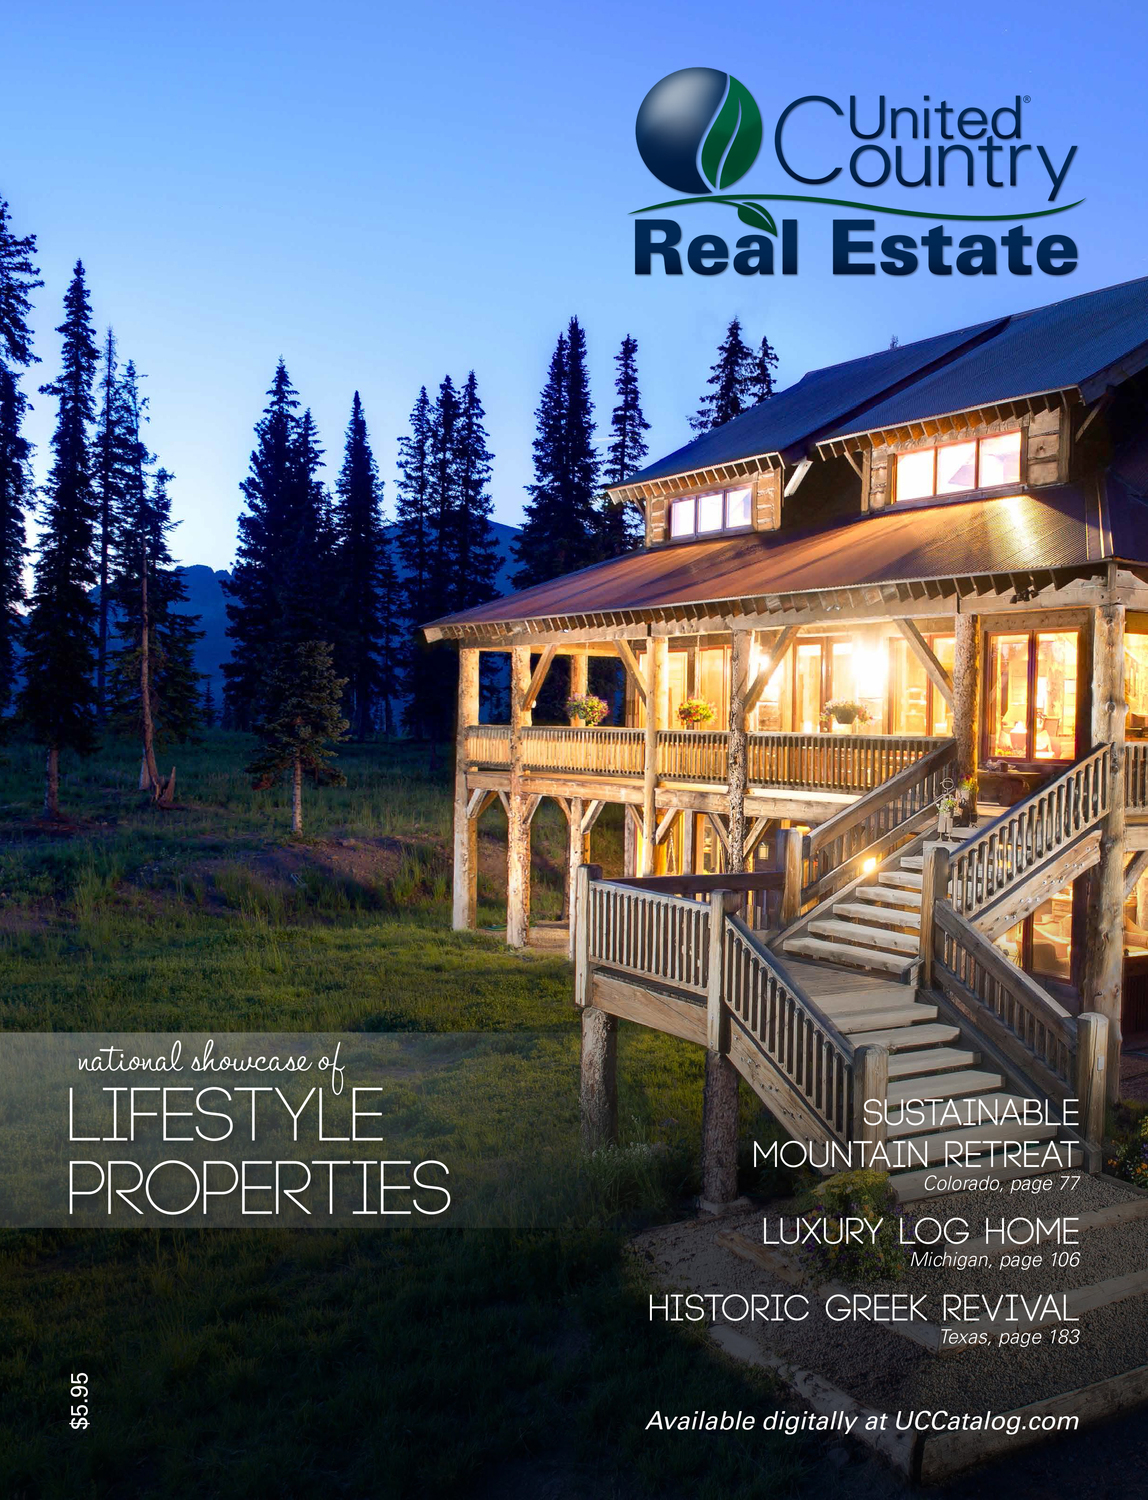 Lifestyle Properties - United Country